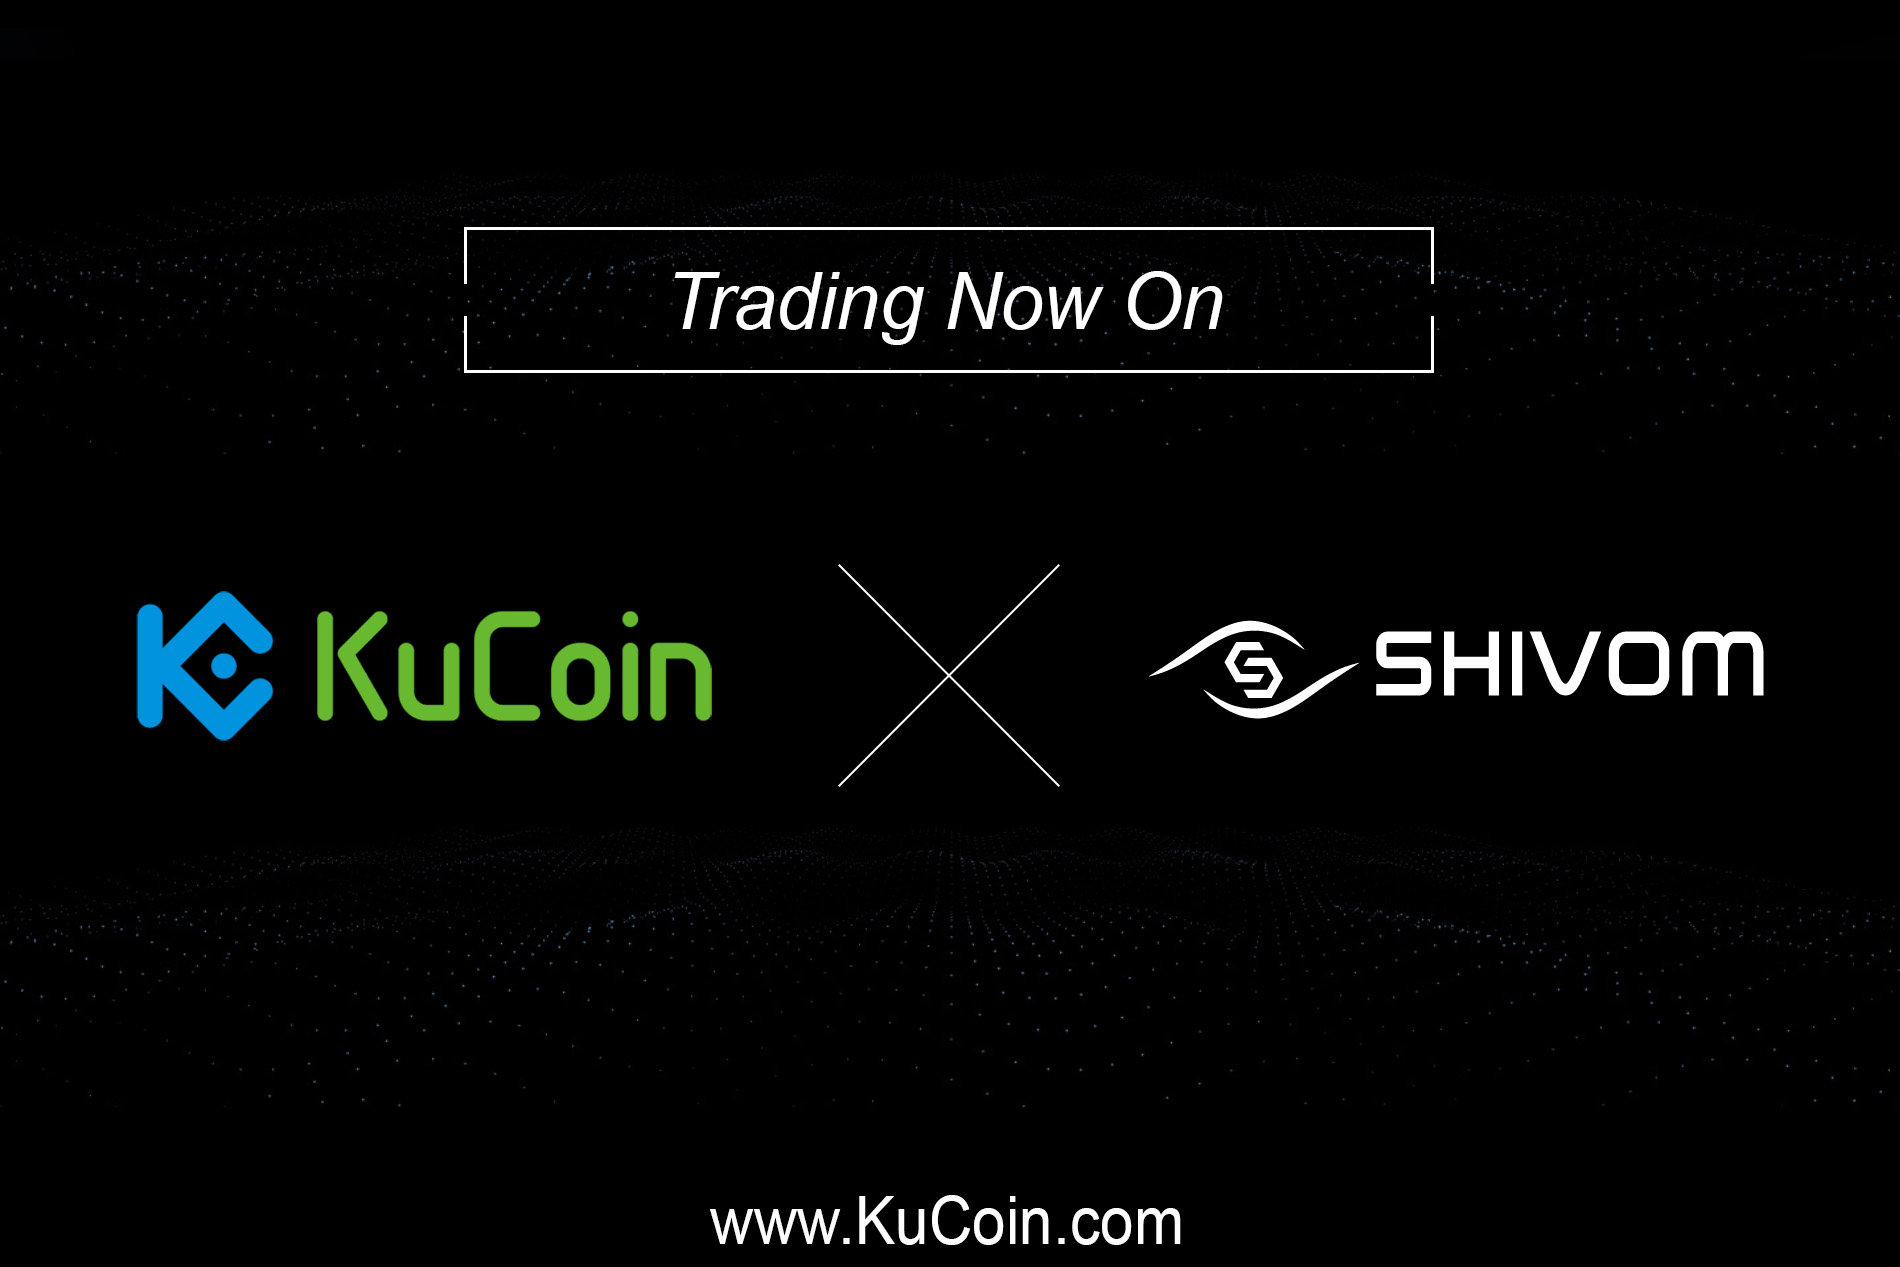 shivom trading now on kucoin